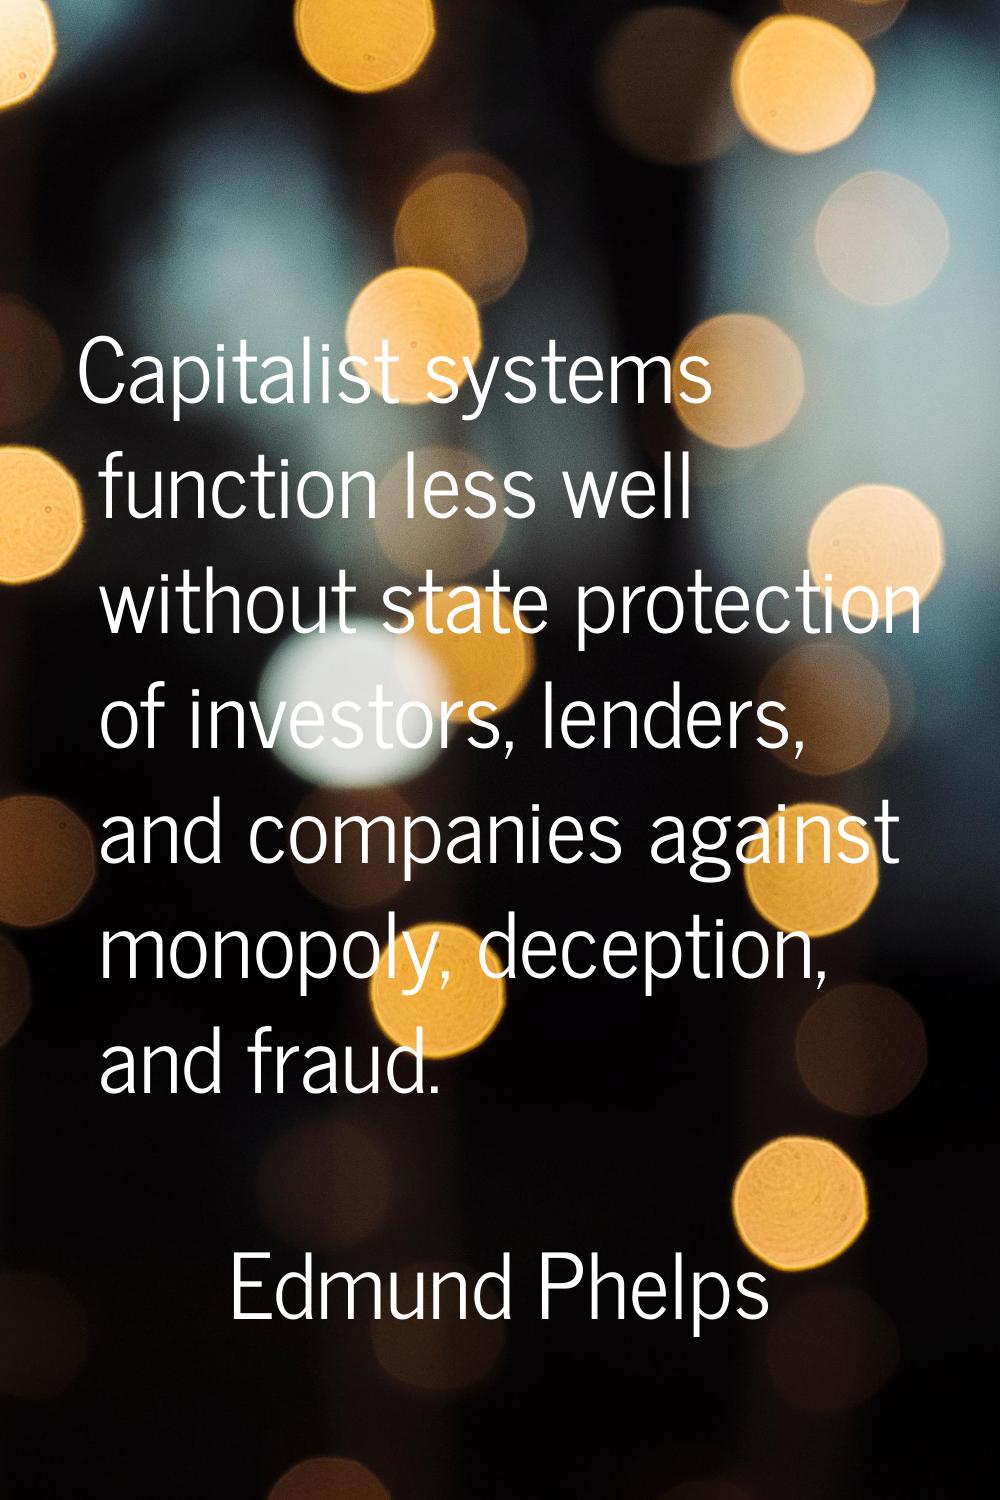 Capitalist systems function less well without state protection of investors, lenders, and companies